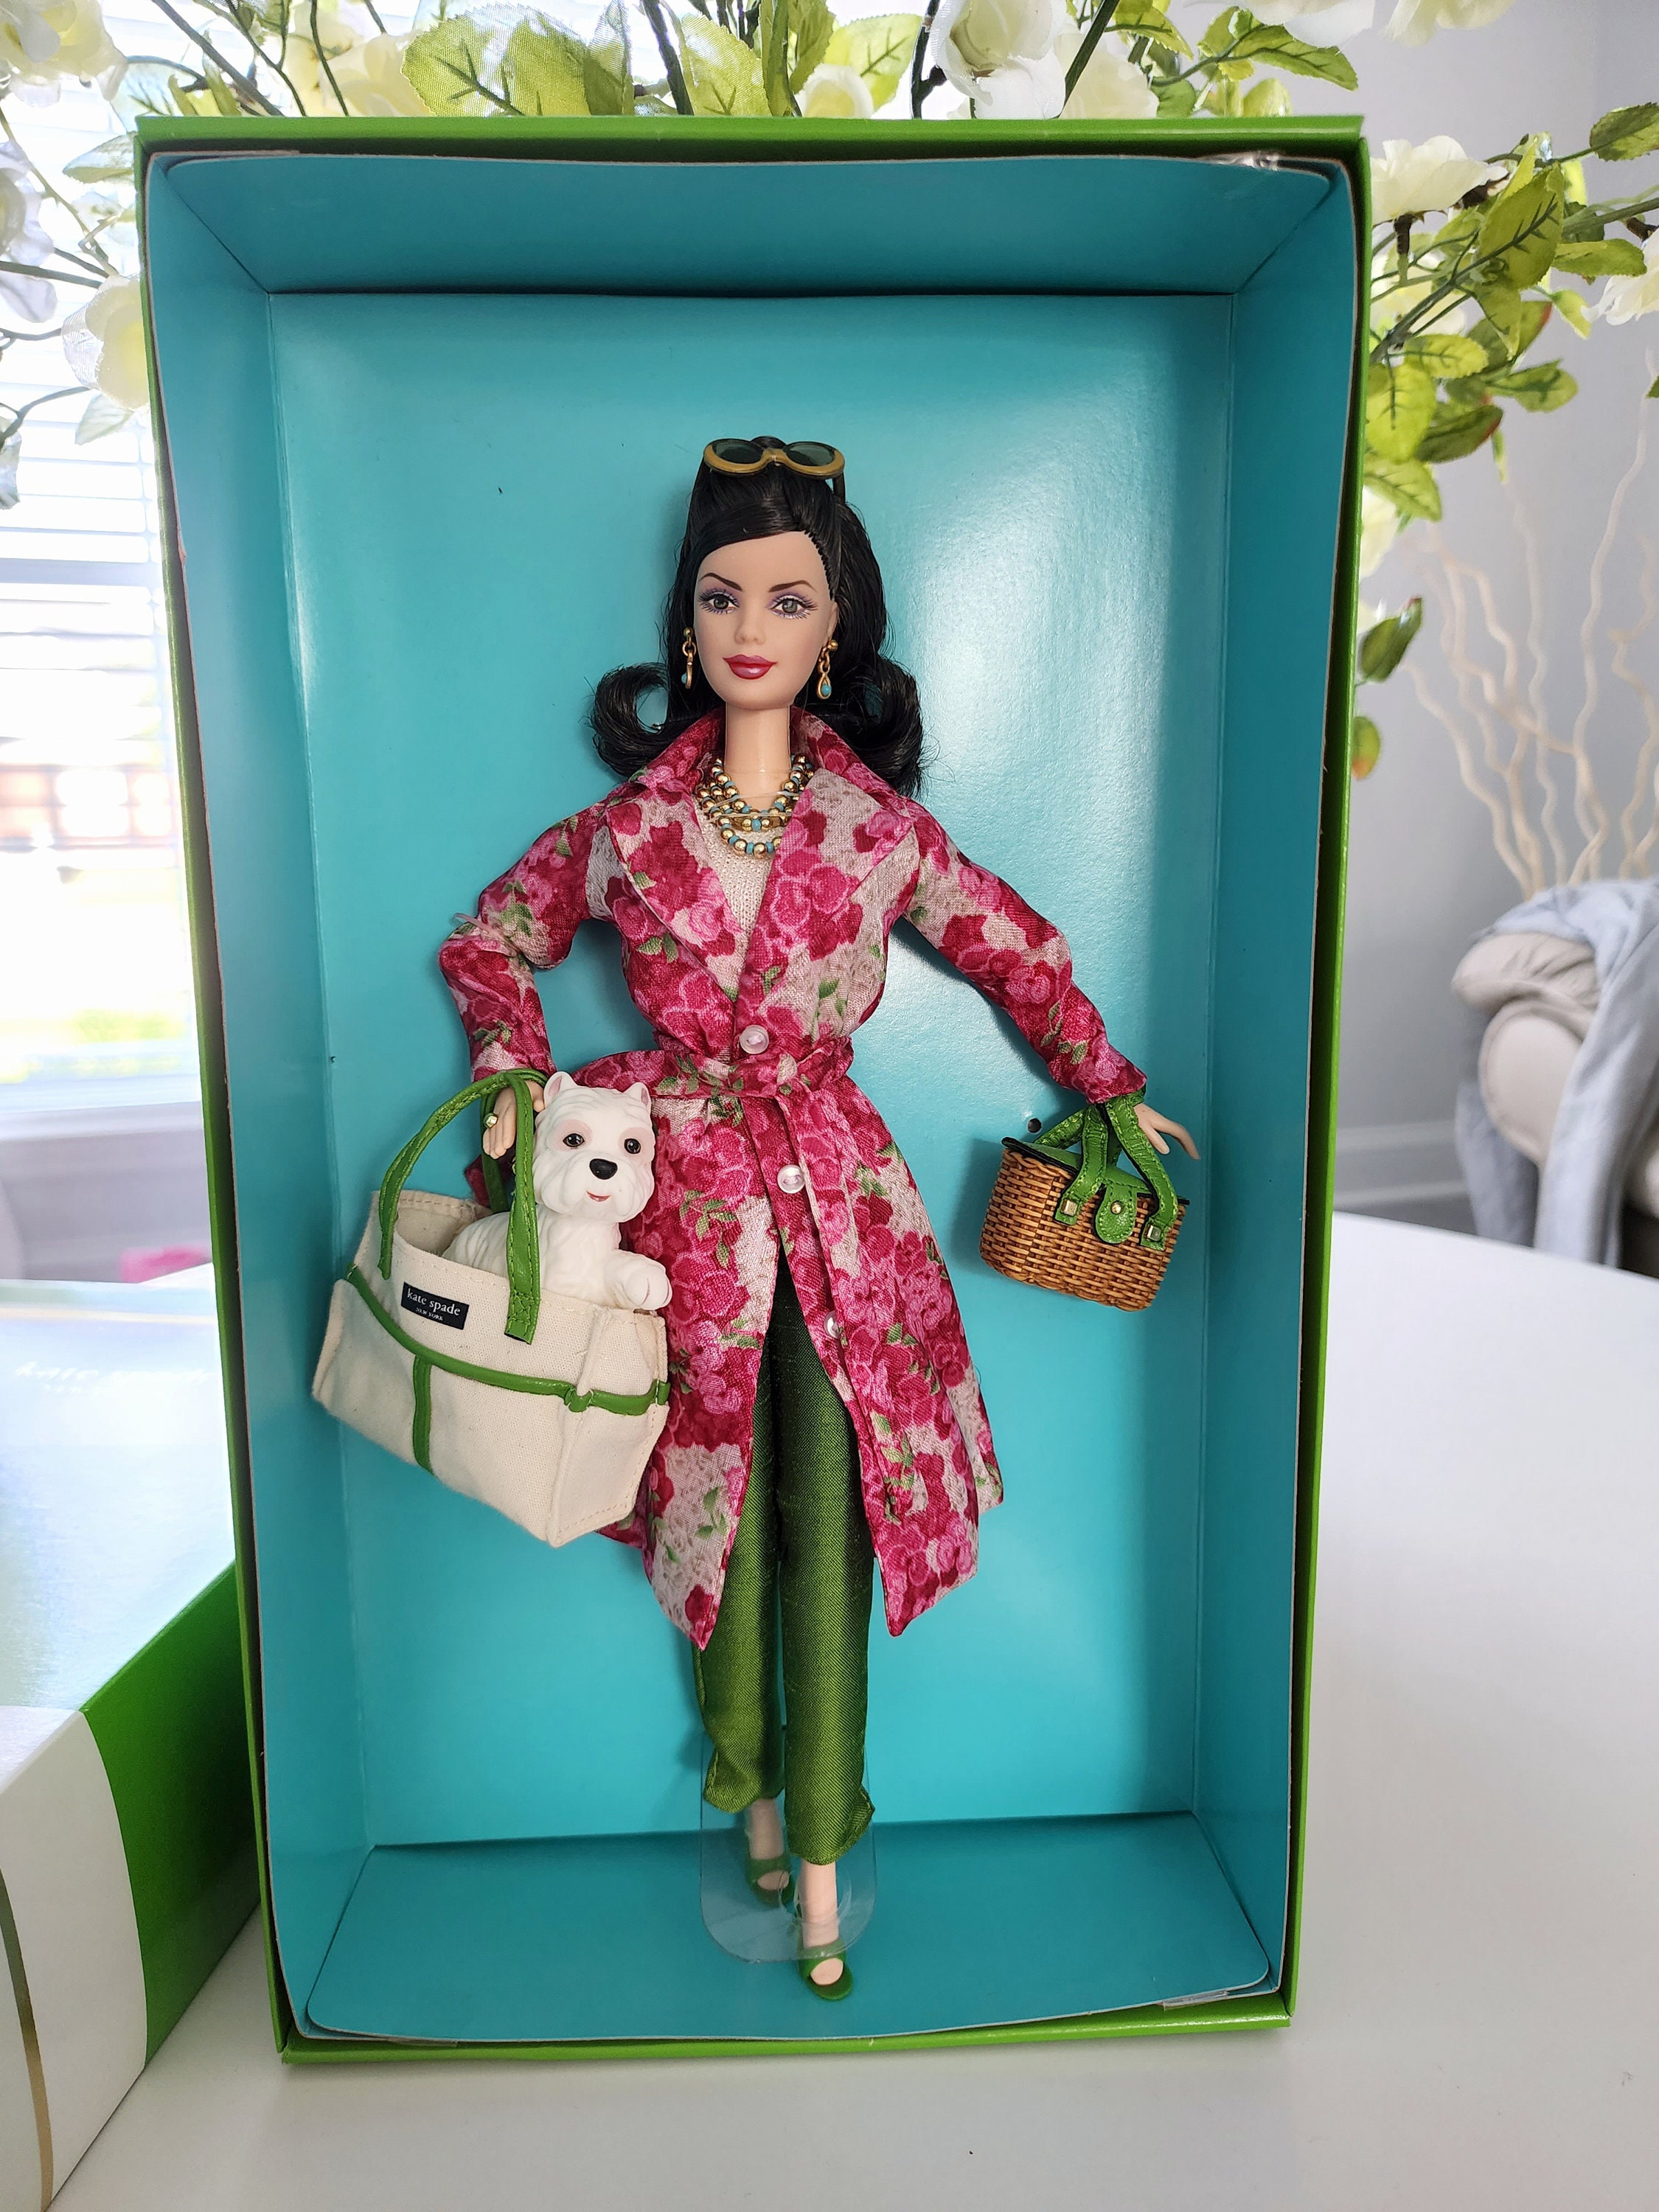 Kate Spade Barbie Doll Limited Edition B2513 2003 - Etsy New Zealand